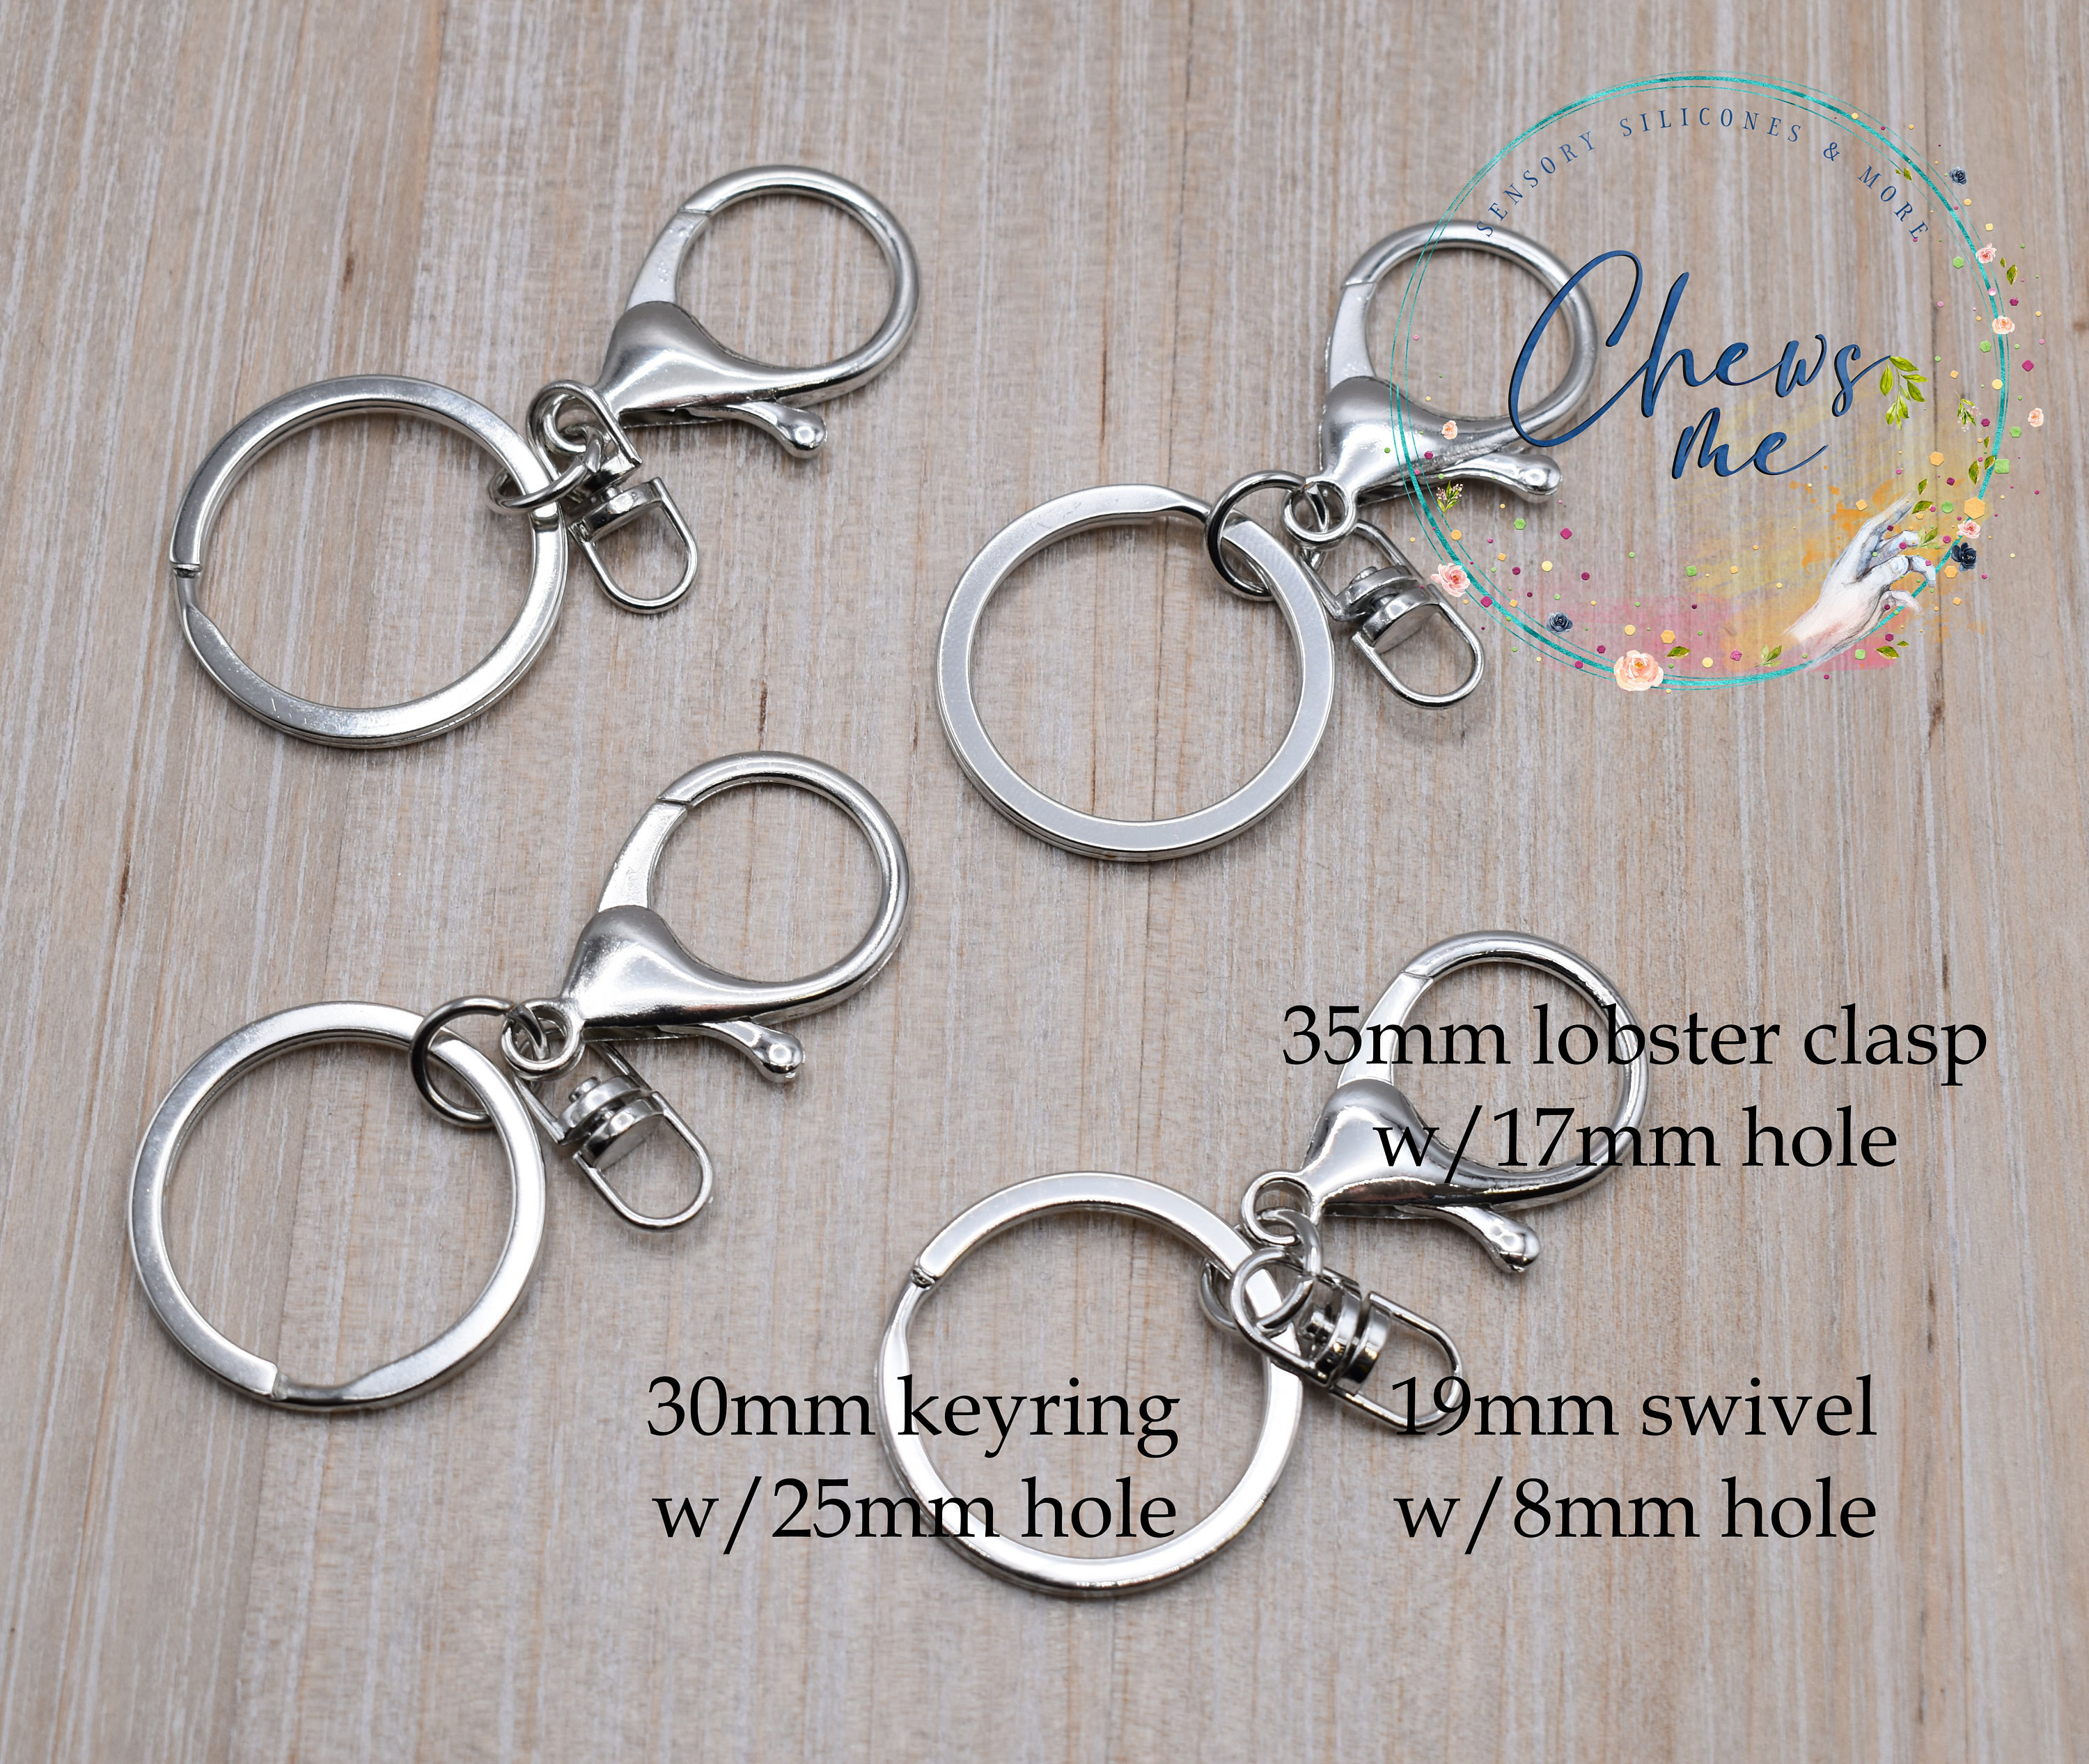 Bulk KeyChain Keyring with Chain jump rings,Keychain Findings Split Ring  Keyring Craft Beading ,Silver ,Key Chain Making,Keychain Supplies